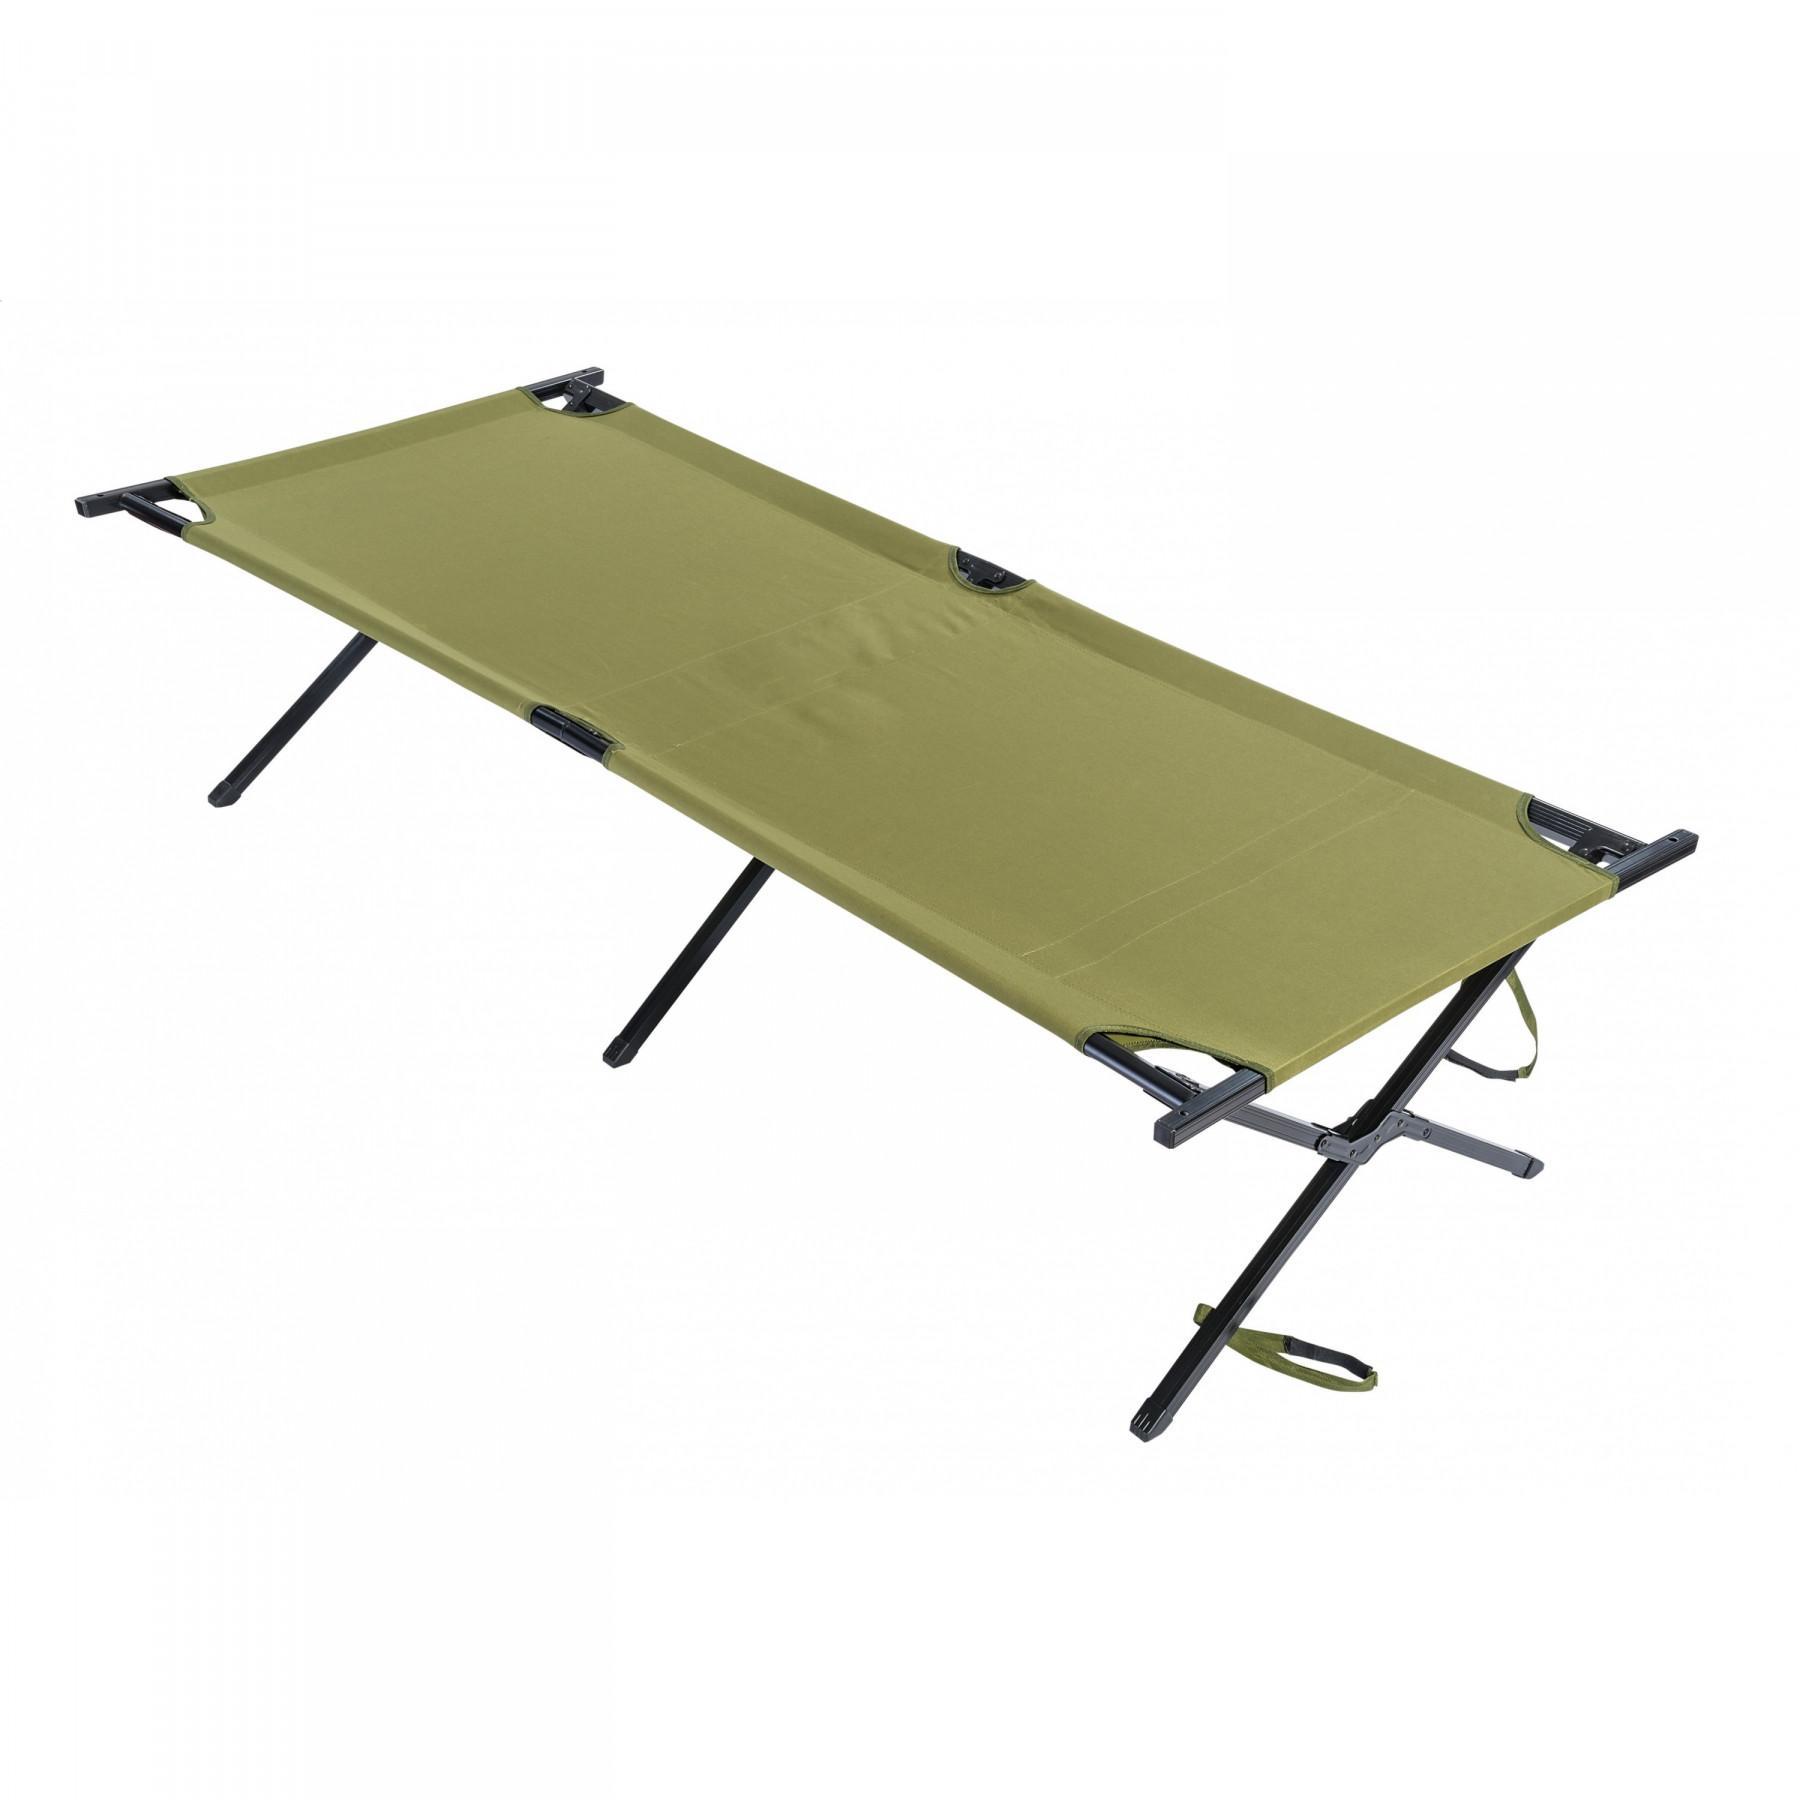 Camp bed Ferrino Strong cot xl